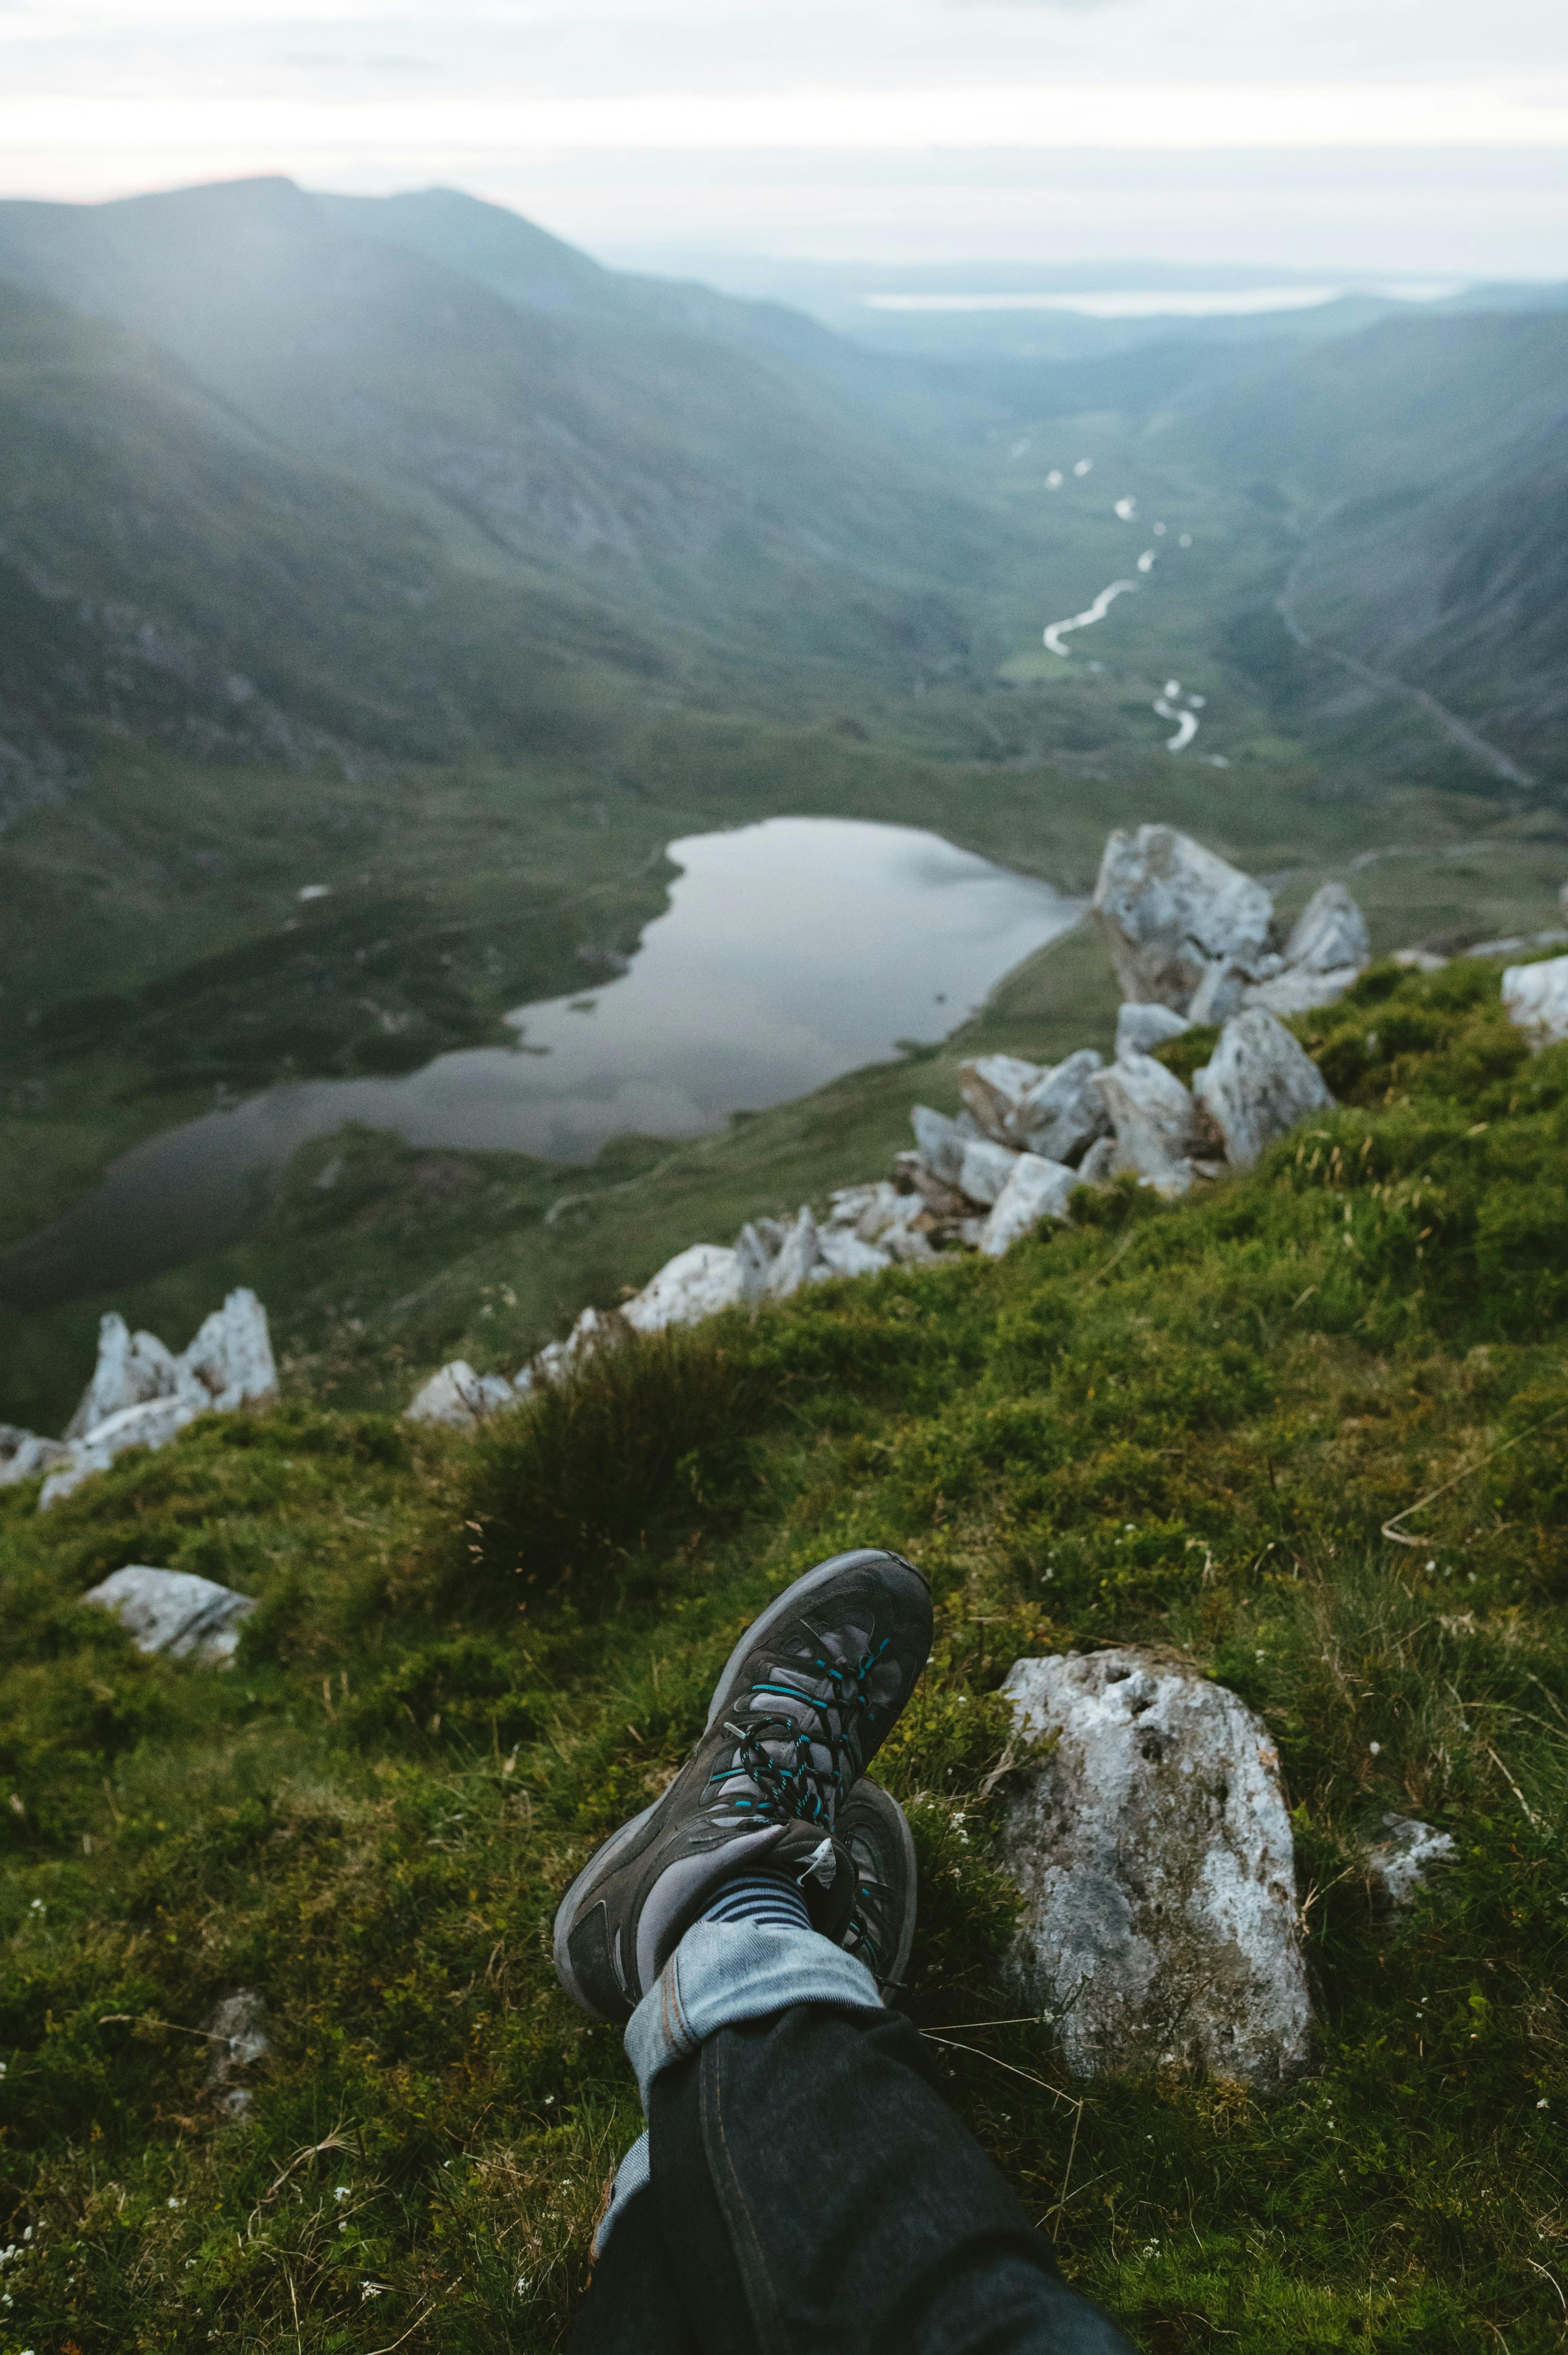 The photo is focused on someone's outstretched legs and their hiking boots. They sit on a rocky hillside with an alpine lake and river stretching into the background. 